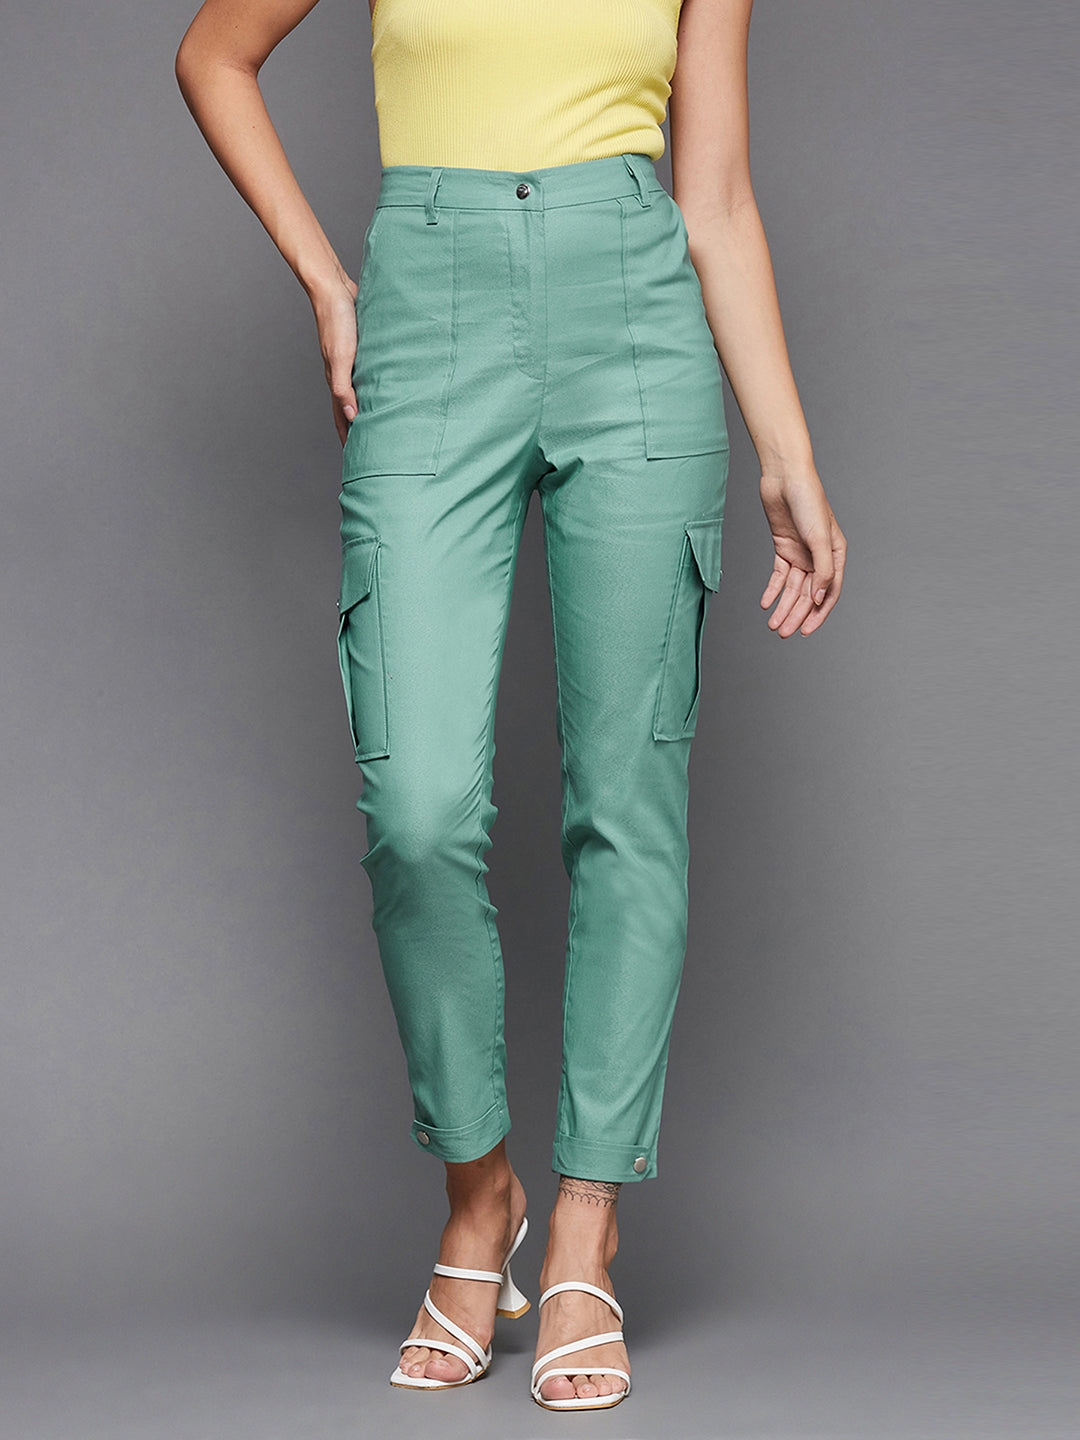 MISS CHASE | Women's Blue  Cargos